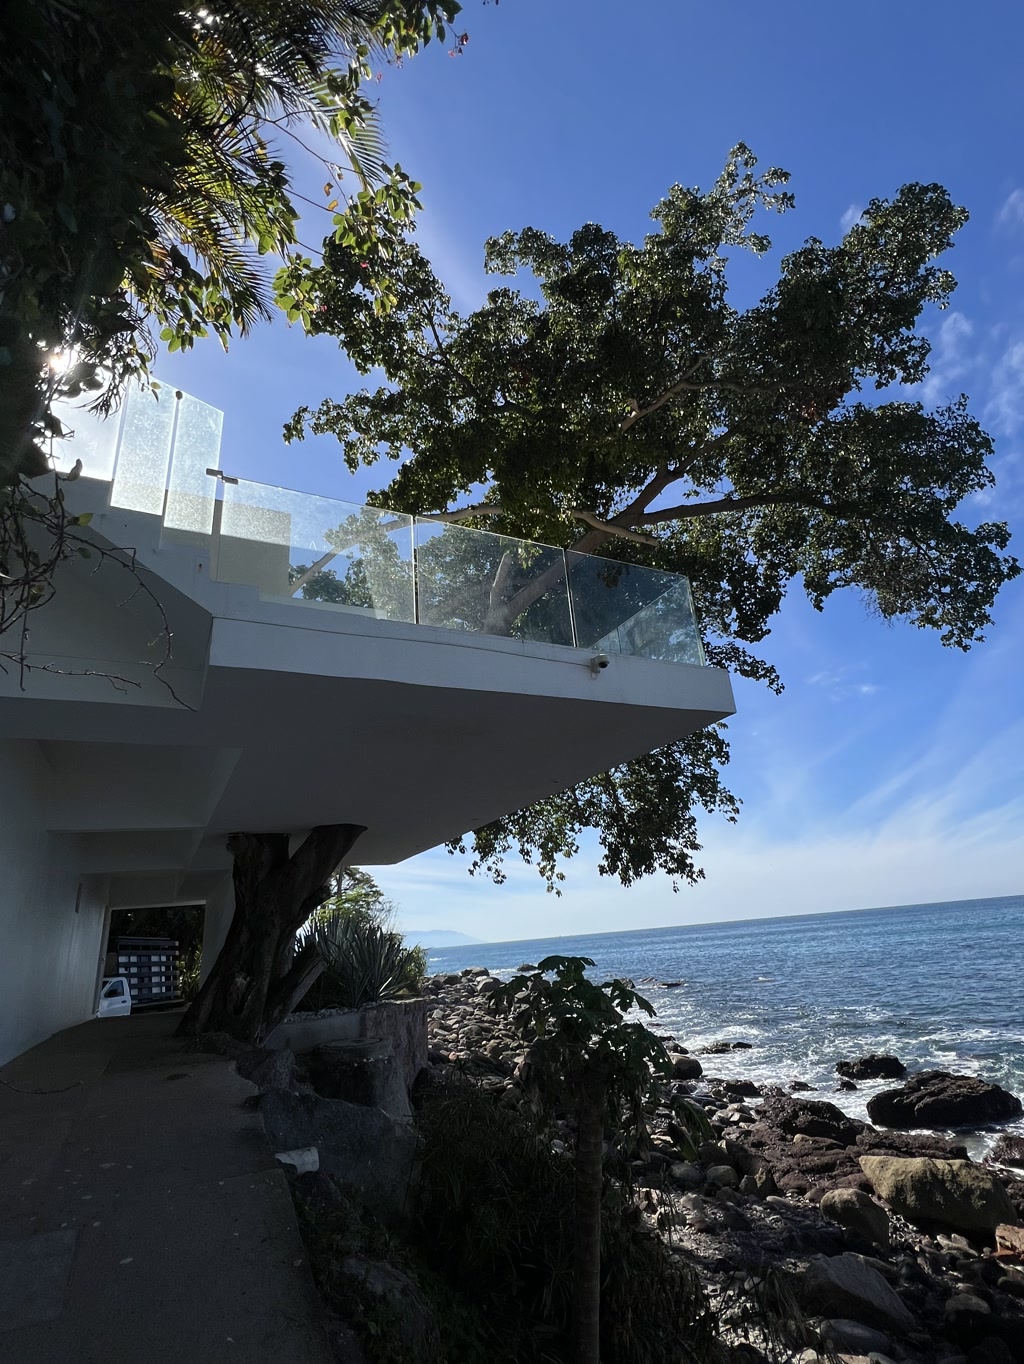 A modern overhanging structure with a glass balcony sits atop a support that blends into a rocky shoreline with the ocean in the background. The building is predominantly white and appears to be a contemporary design. A large, leafy tree emerges beside the building, its branches extending outward toward the sunlight. Beneath the structure, there is an open space leading towards the water, where waves can be seen hitting the rocks. A clear sky with minimal cloud cover suggests a bright, sunny day.